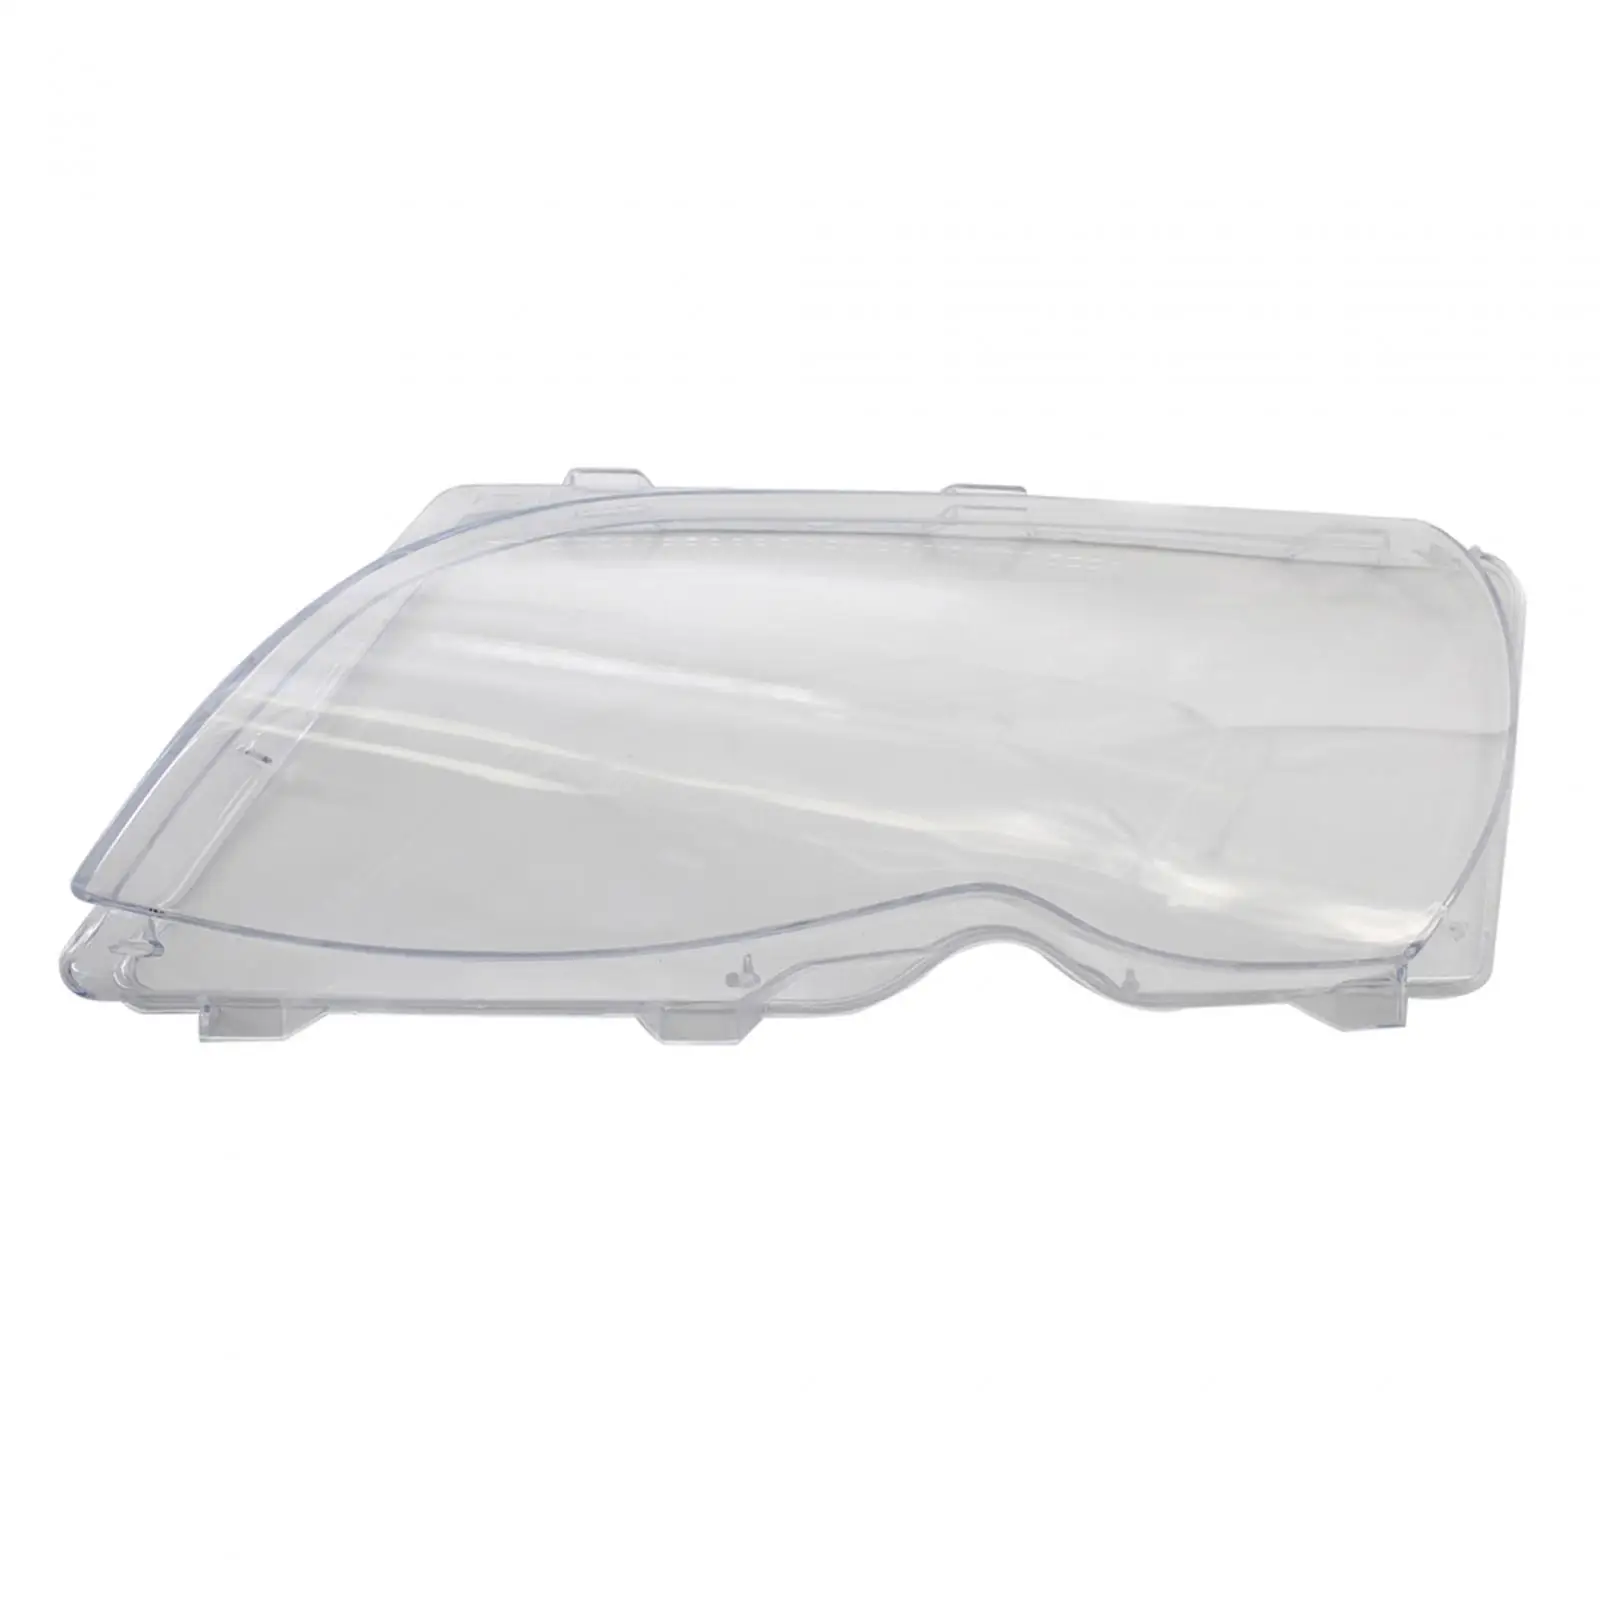 Headlight Lens Decor Cover Spare Parts Auto Accessory Replaces Lampshade Headlight Cover for BMW E46 4 Door 2002-2005